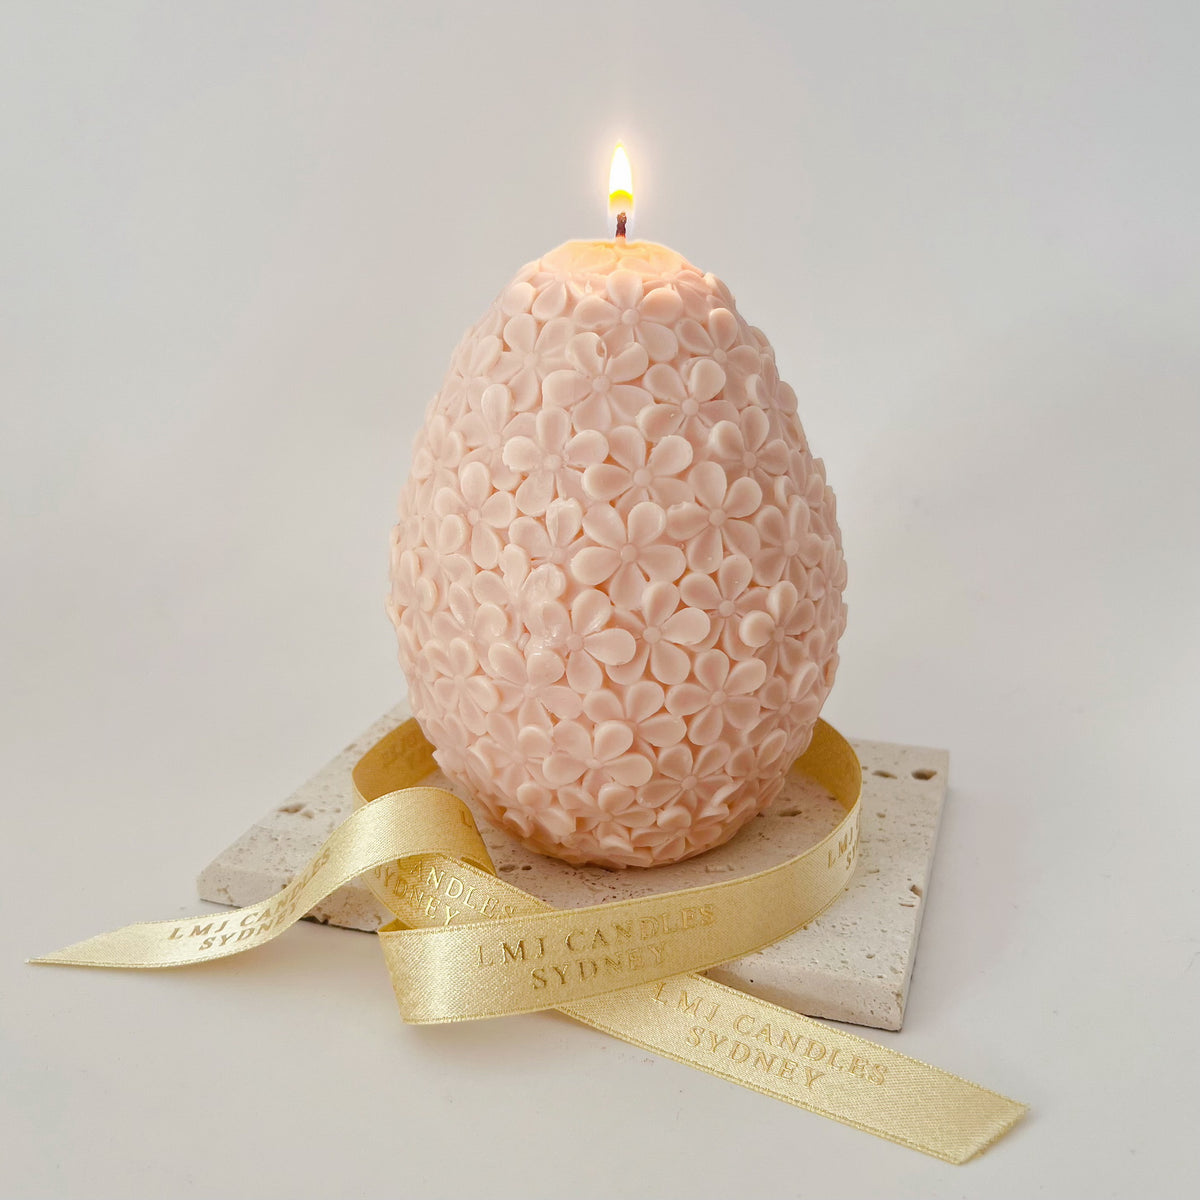 Flower Egg Easter Candle, Decorative Candle, Handmade Scented Soy Wax Candle Australia | LMJ Candles